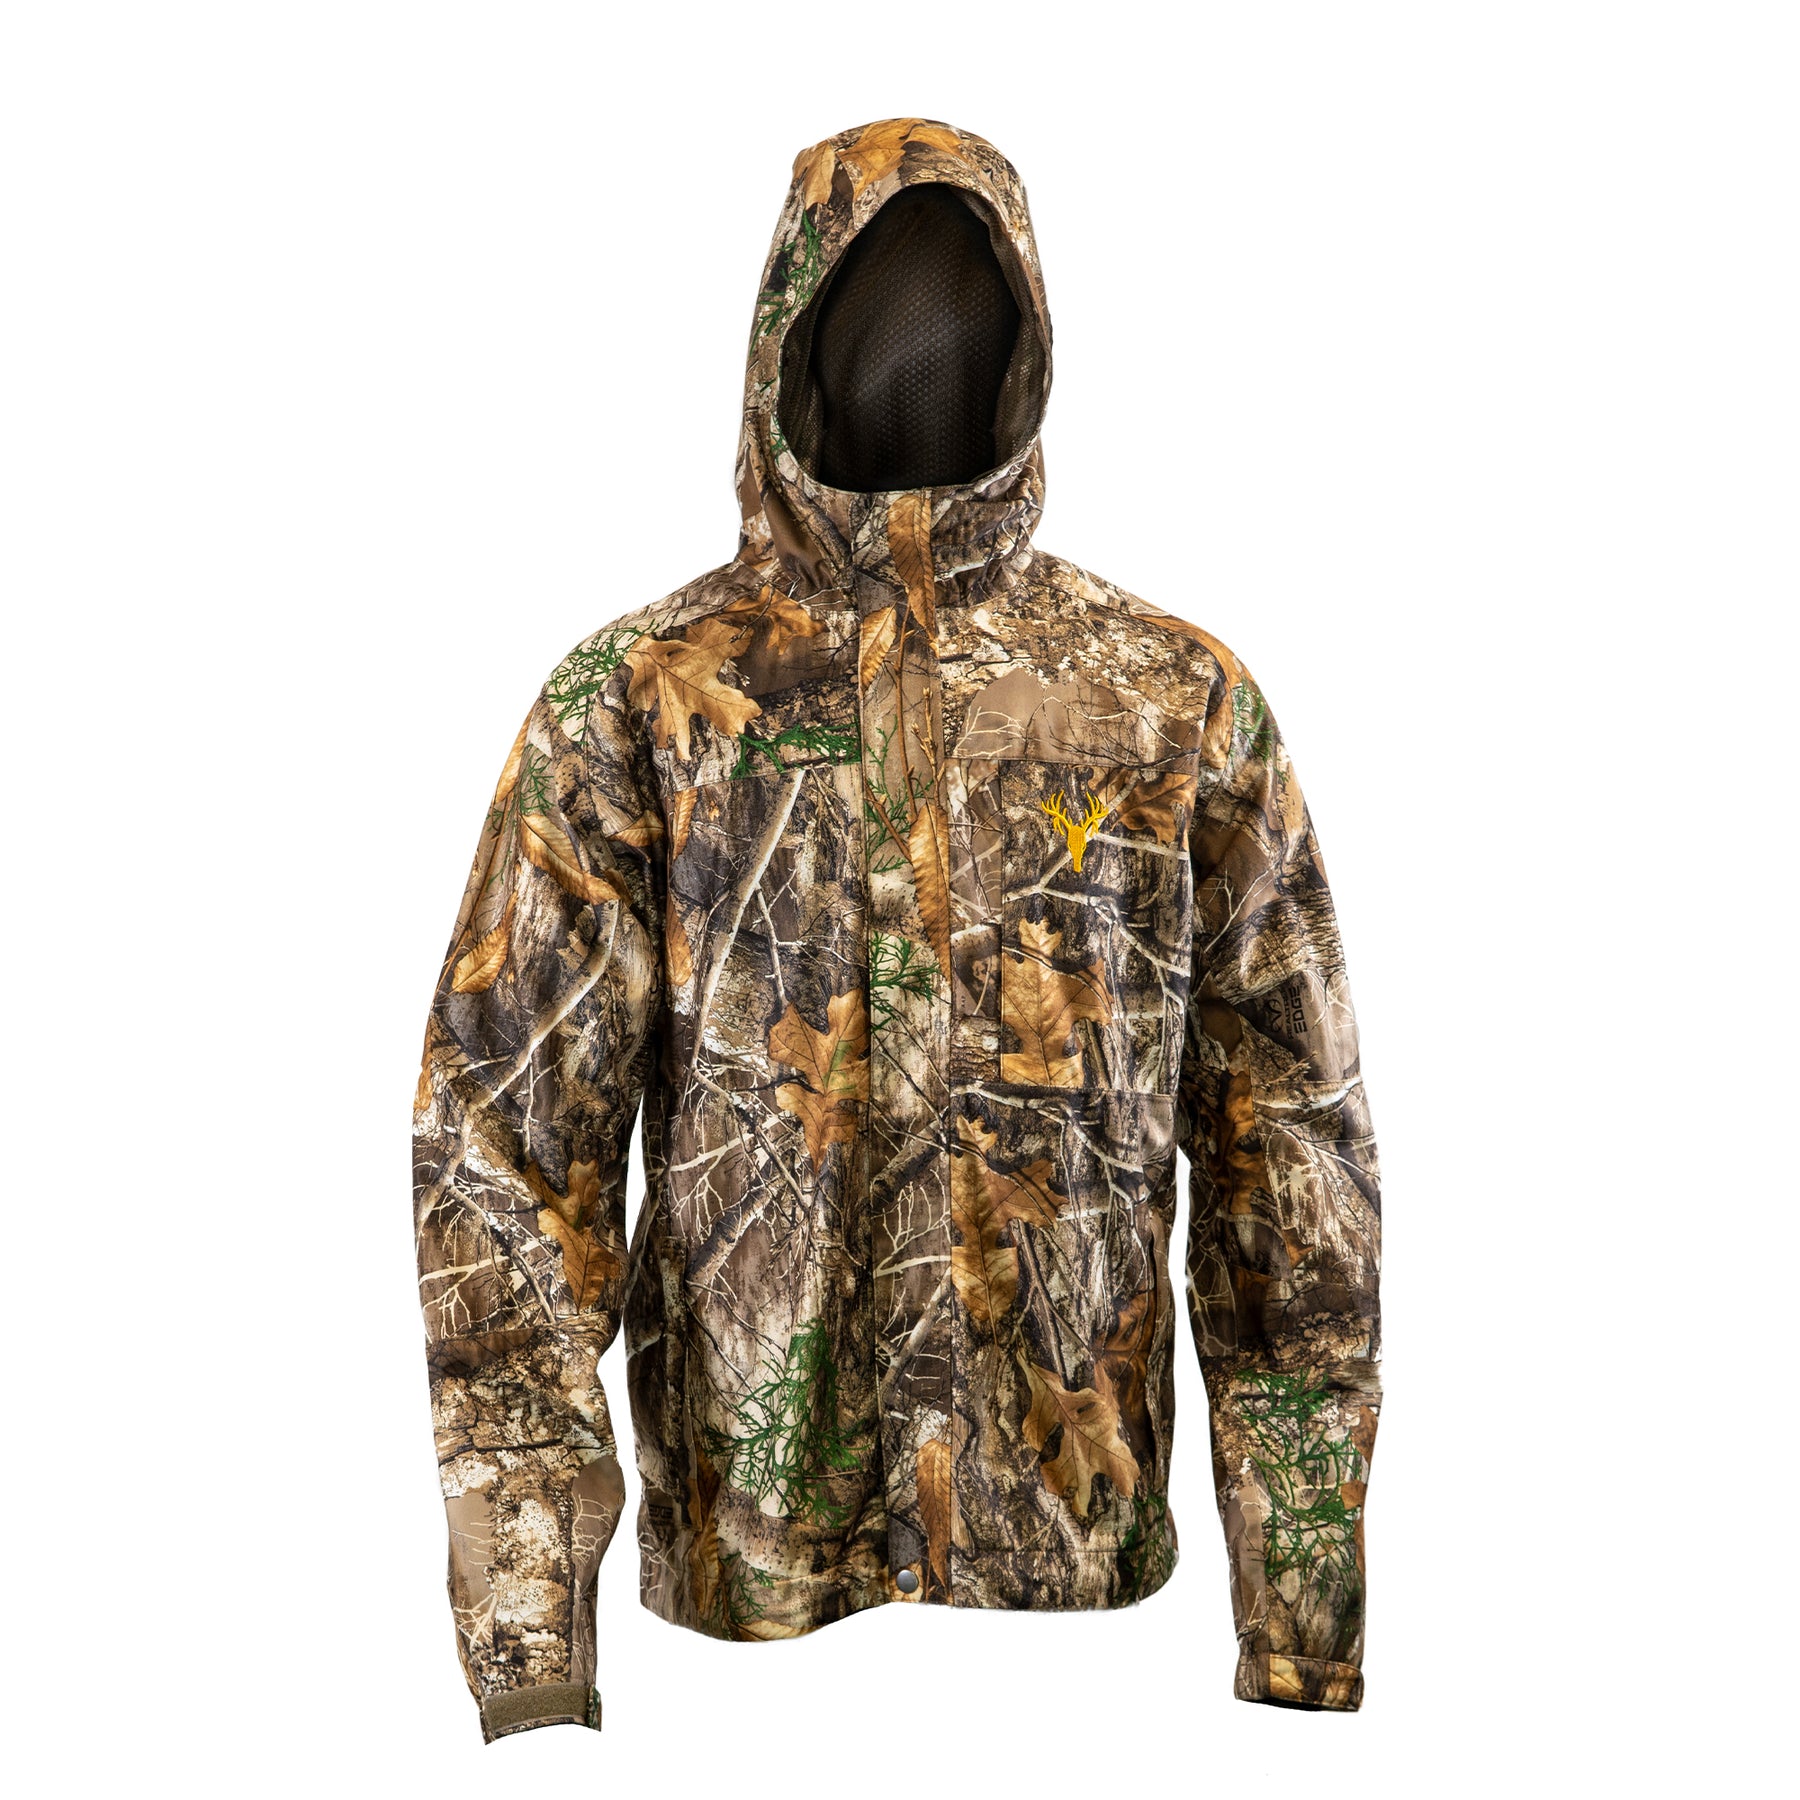 Hot Shot Mens Camo Rain Jacket Realtree Edge Waterproof Hunting Outdoor Apparel, XX-Large, Men's, Size: 2XL, Other